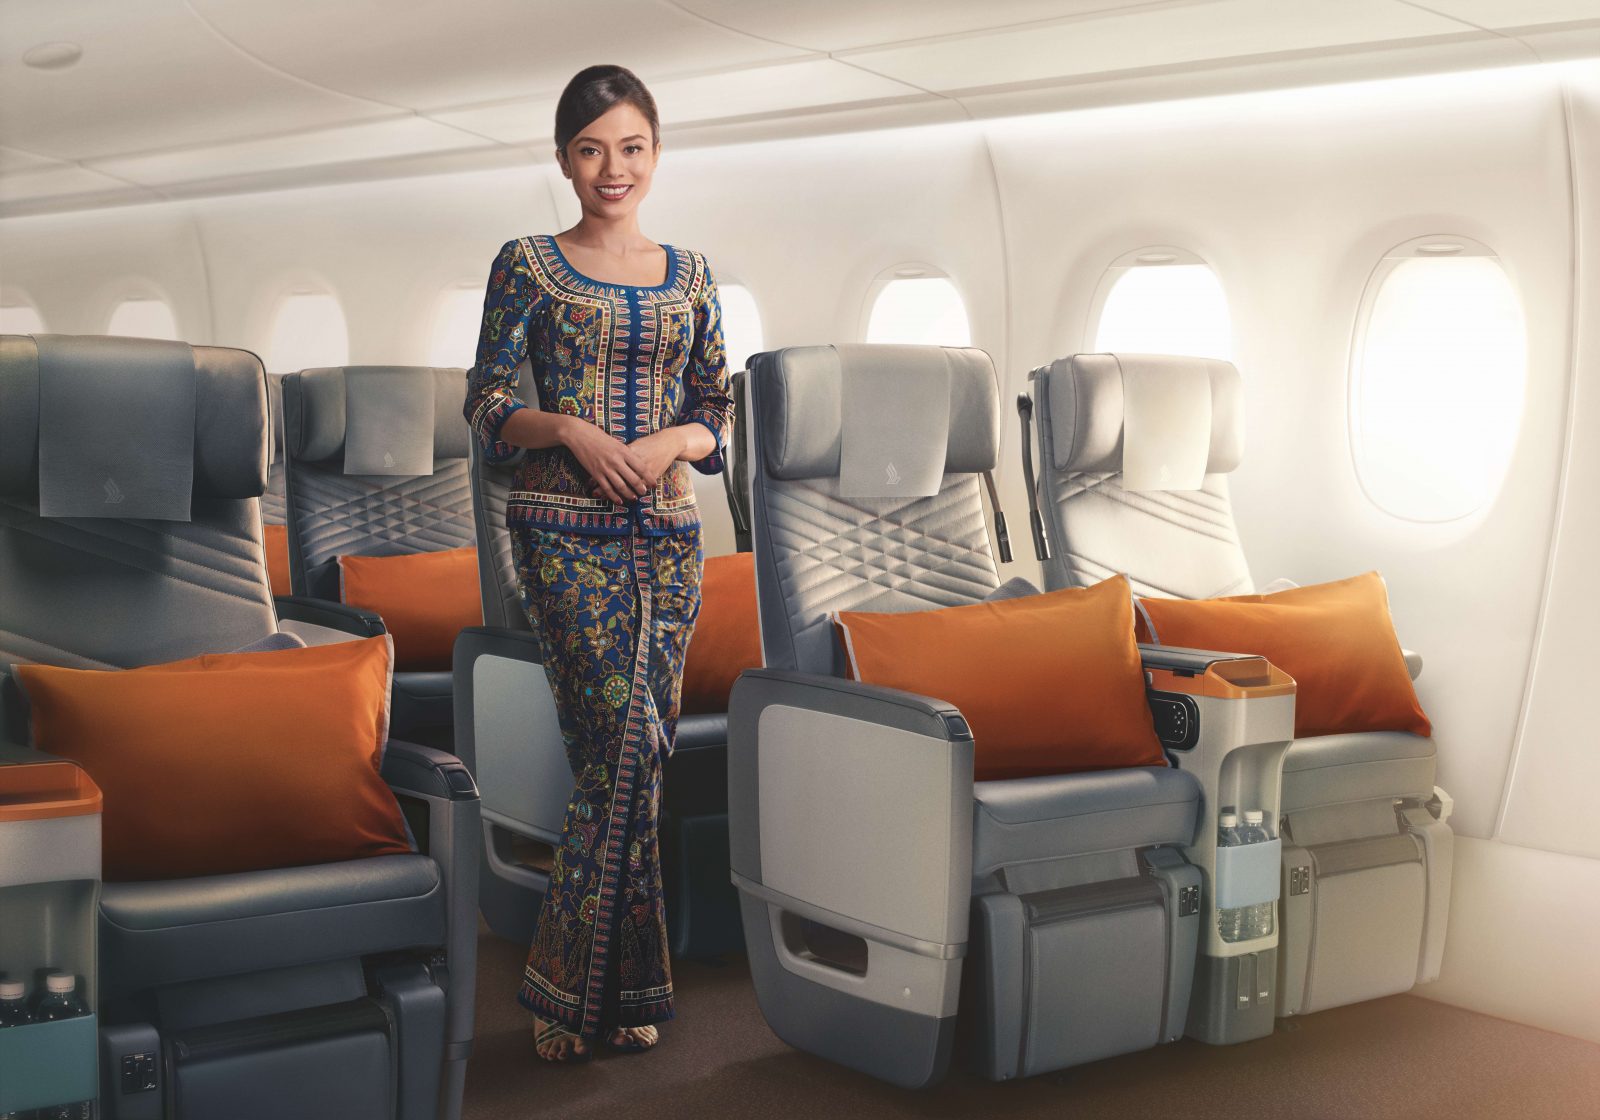 Singapore Airlines Is One Step Closer To Launching The World’s Longest Flight